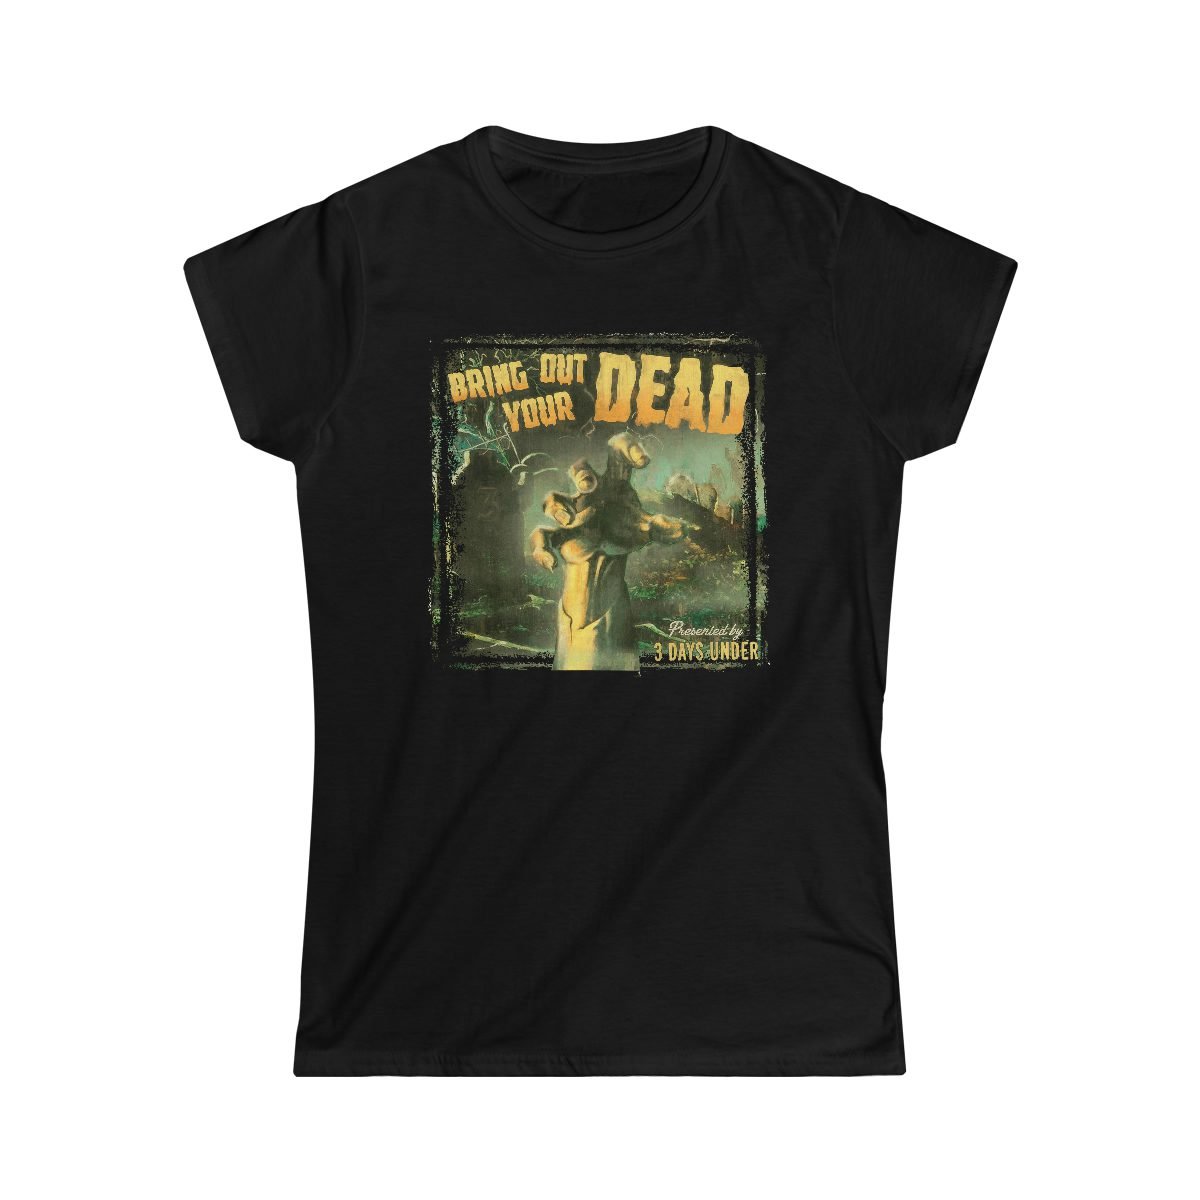 3 Days Under – Bring Out Your Dead Women’s Short Sleeve Tshirt 64000L